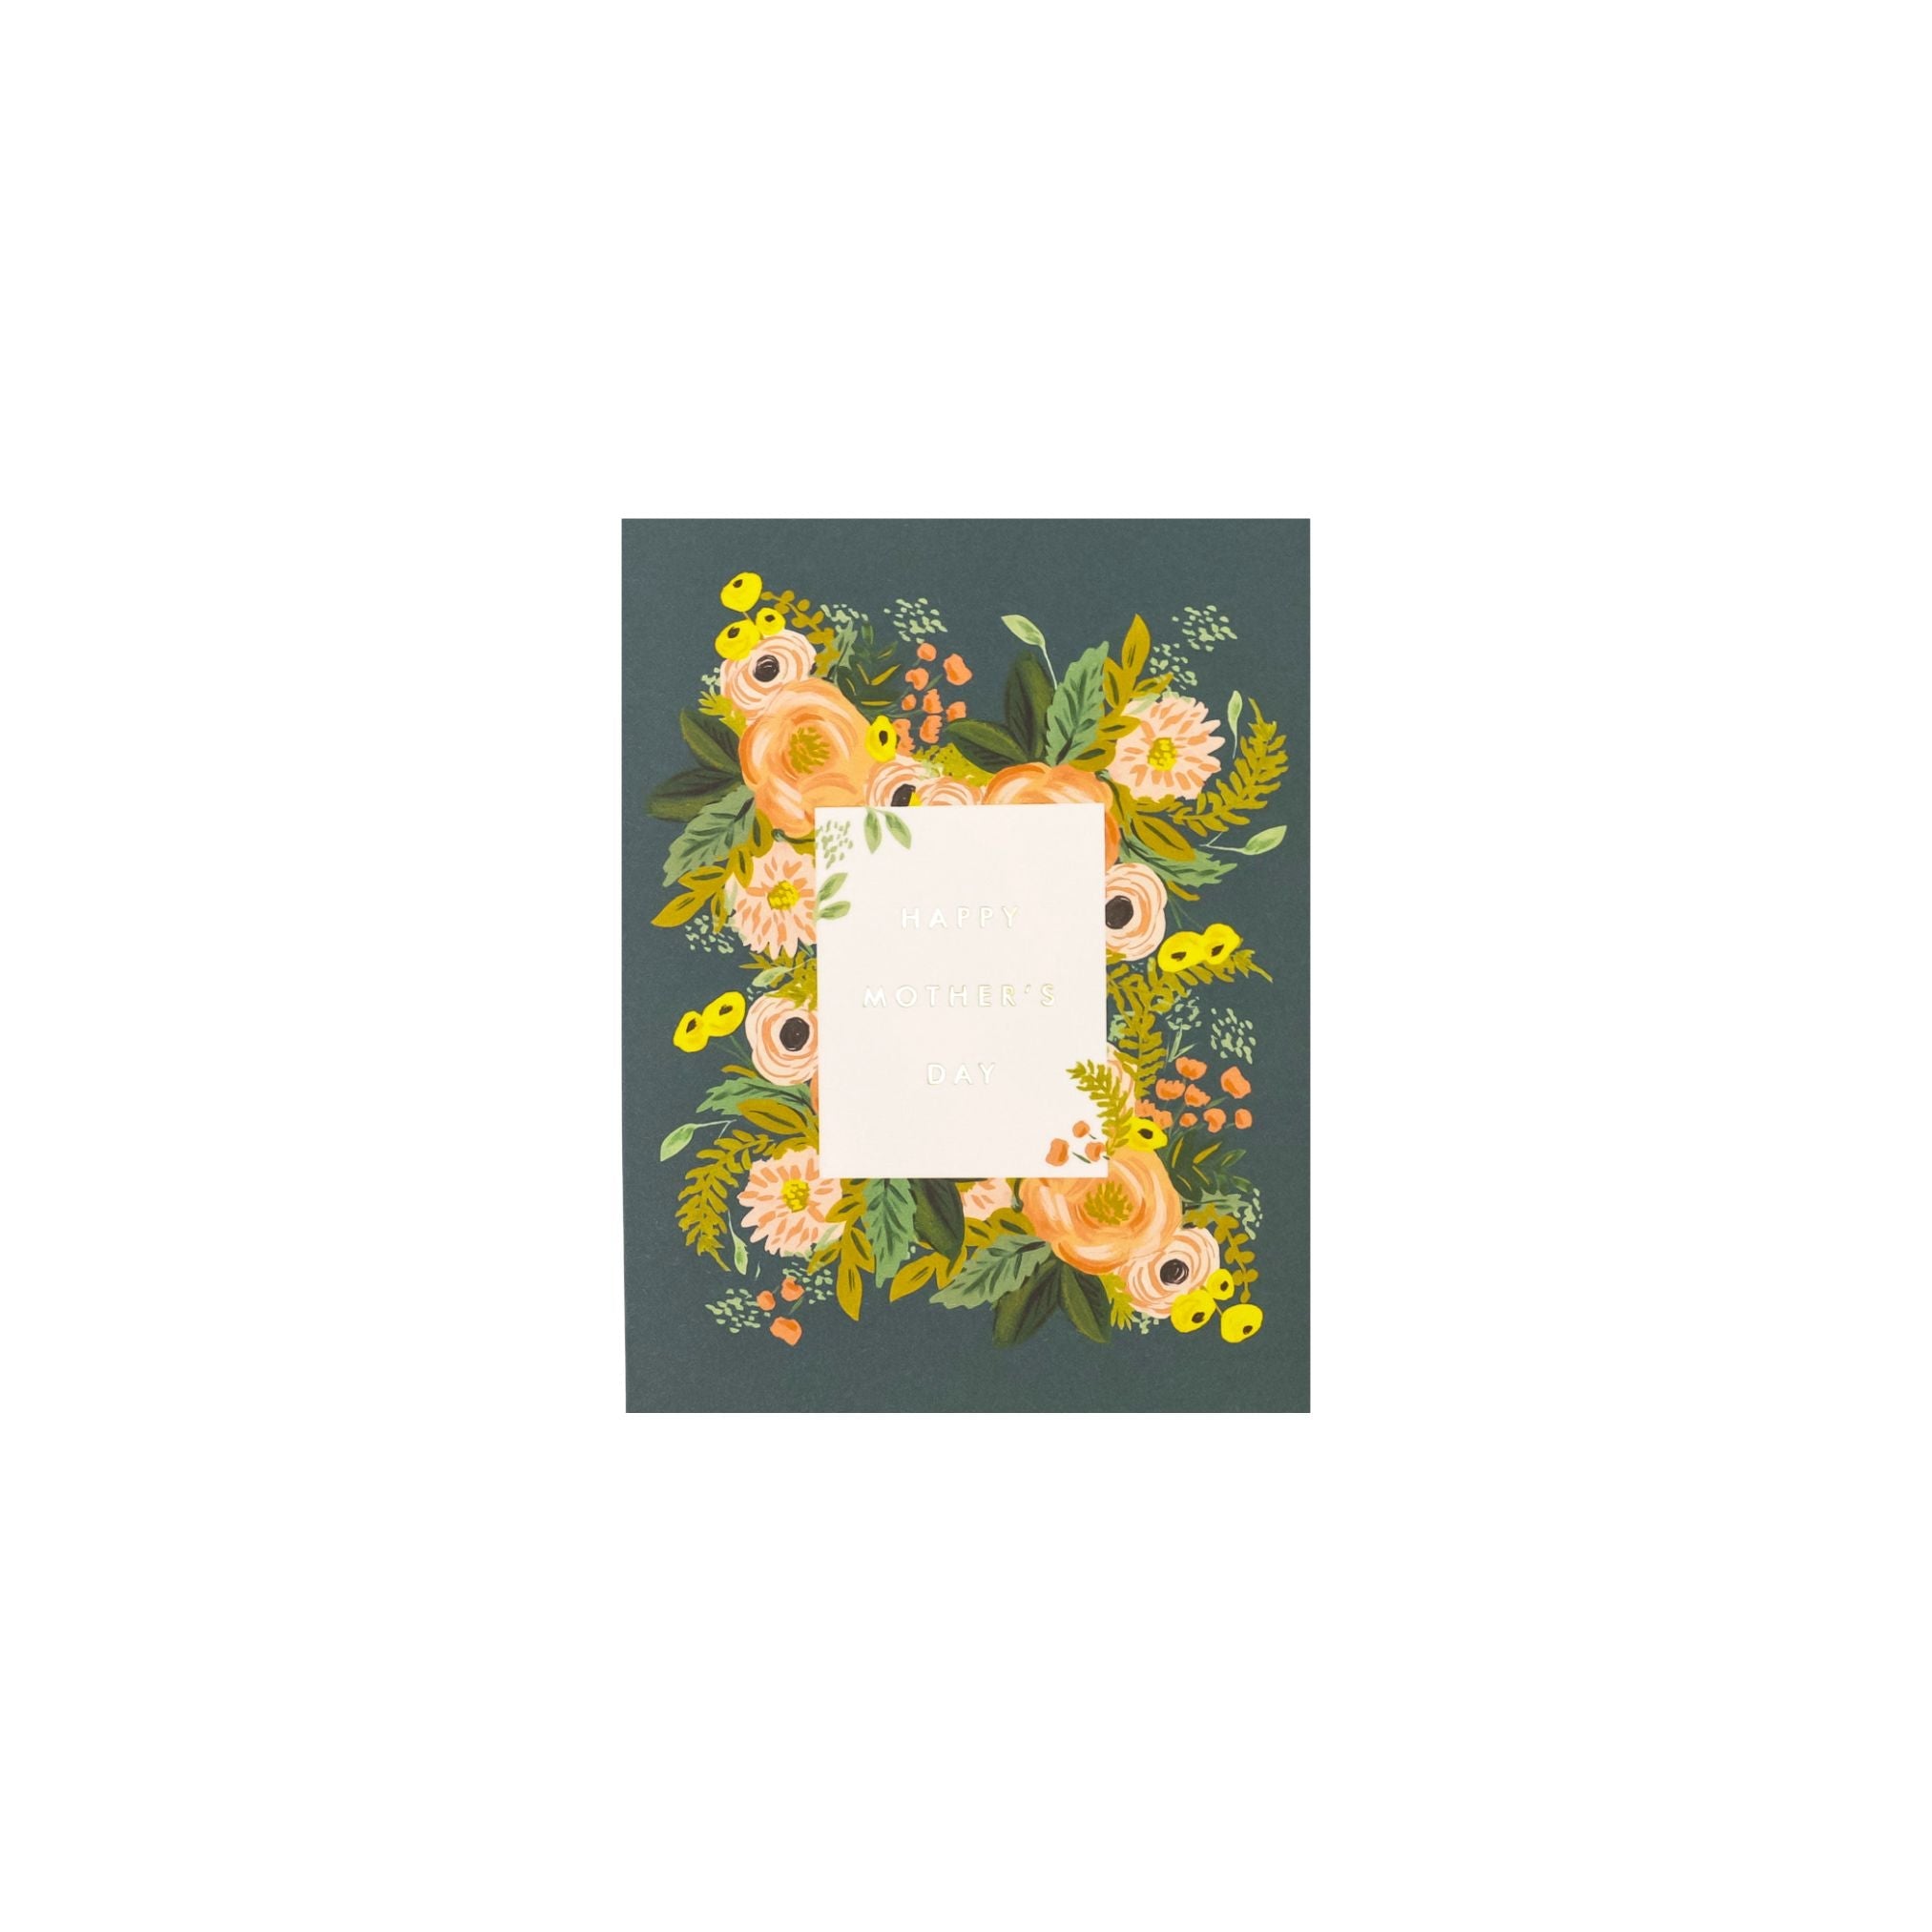 Bouquet Mother's Day Card - Green Fresh Florals + Plants